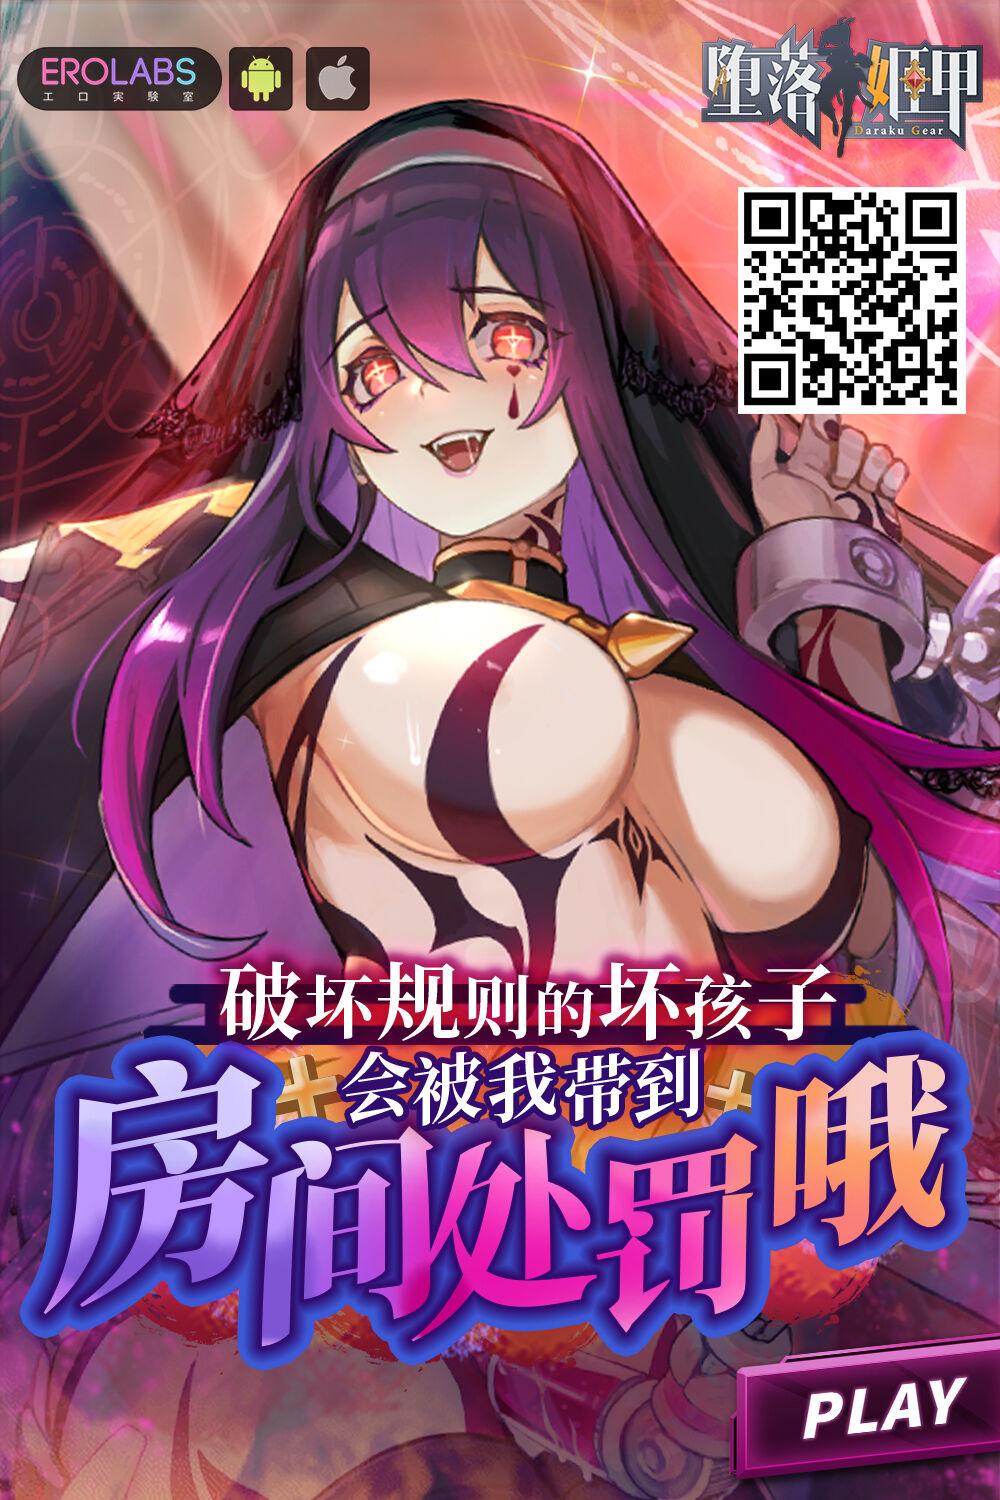 Inma Joshi Daisei no Yuuutsu - The Melancholy of the Succubus who is a college student Ch. 9 20